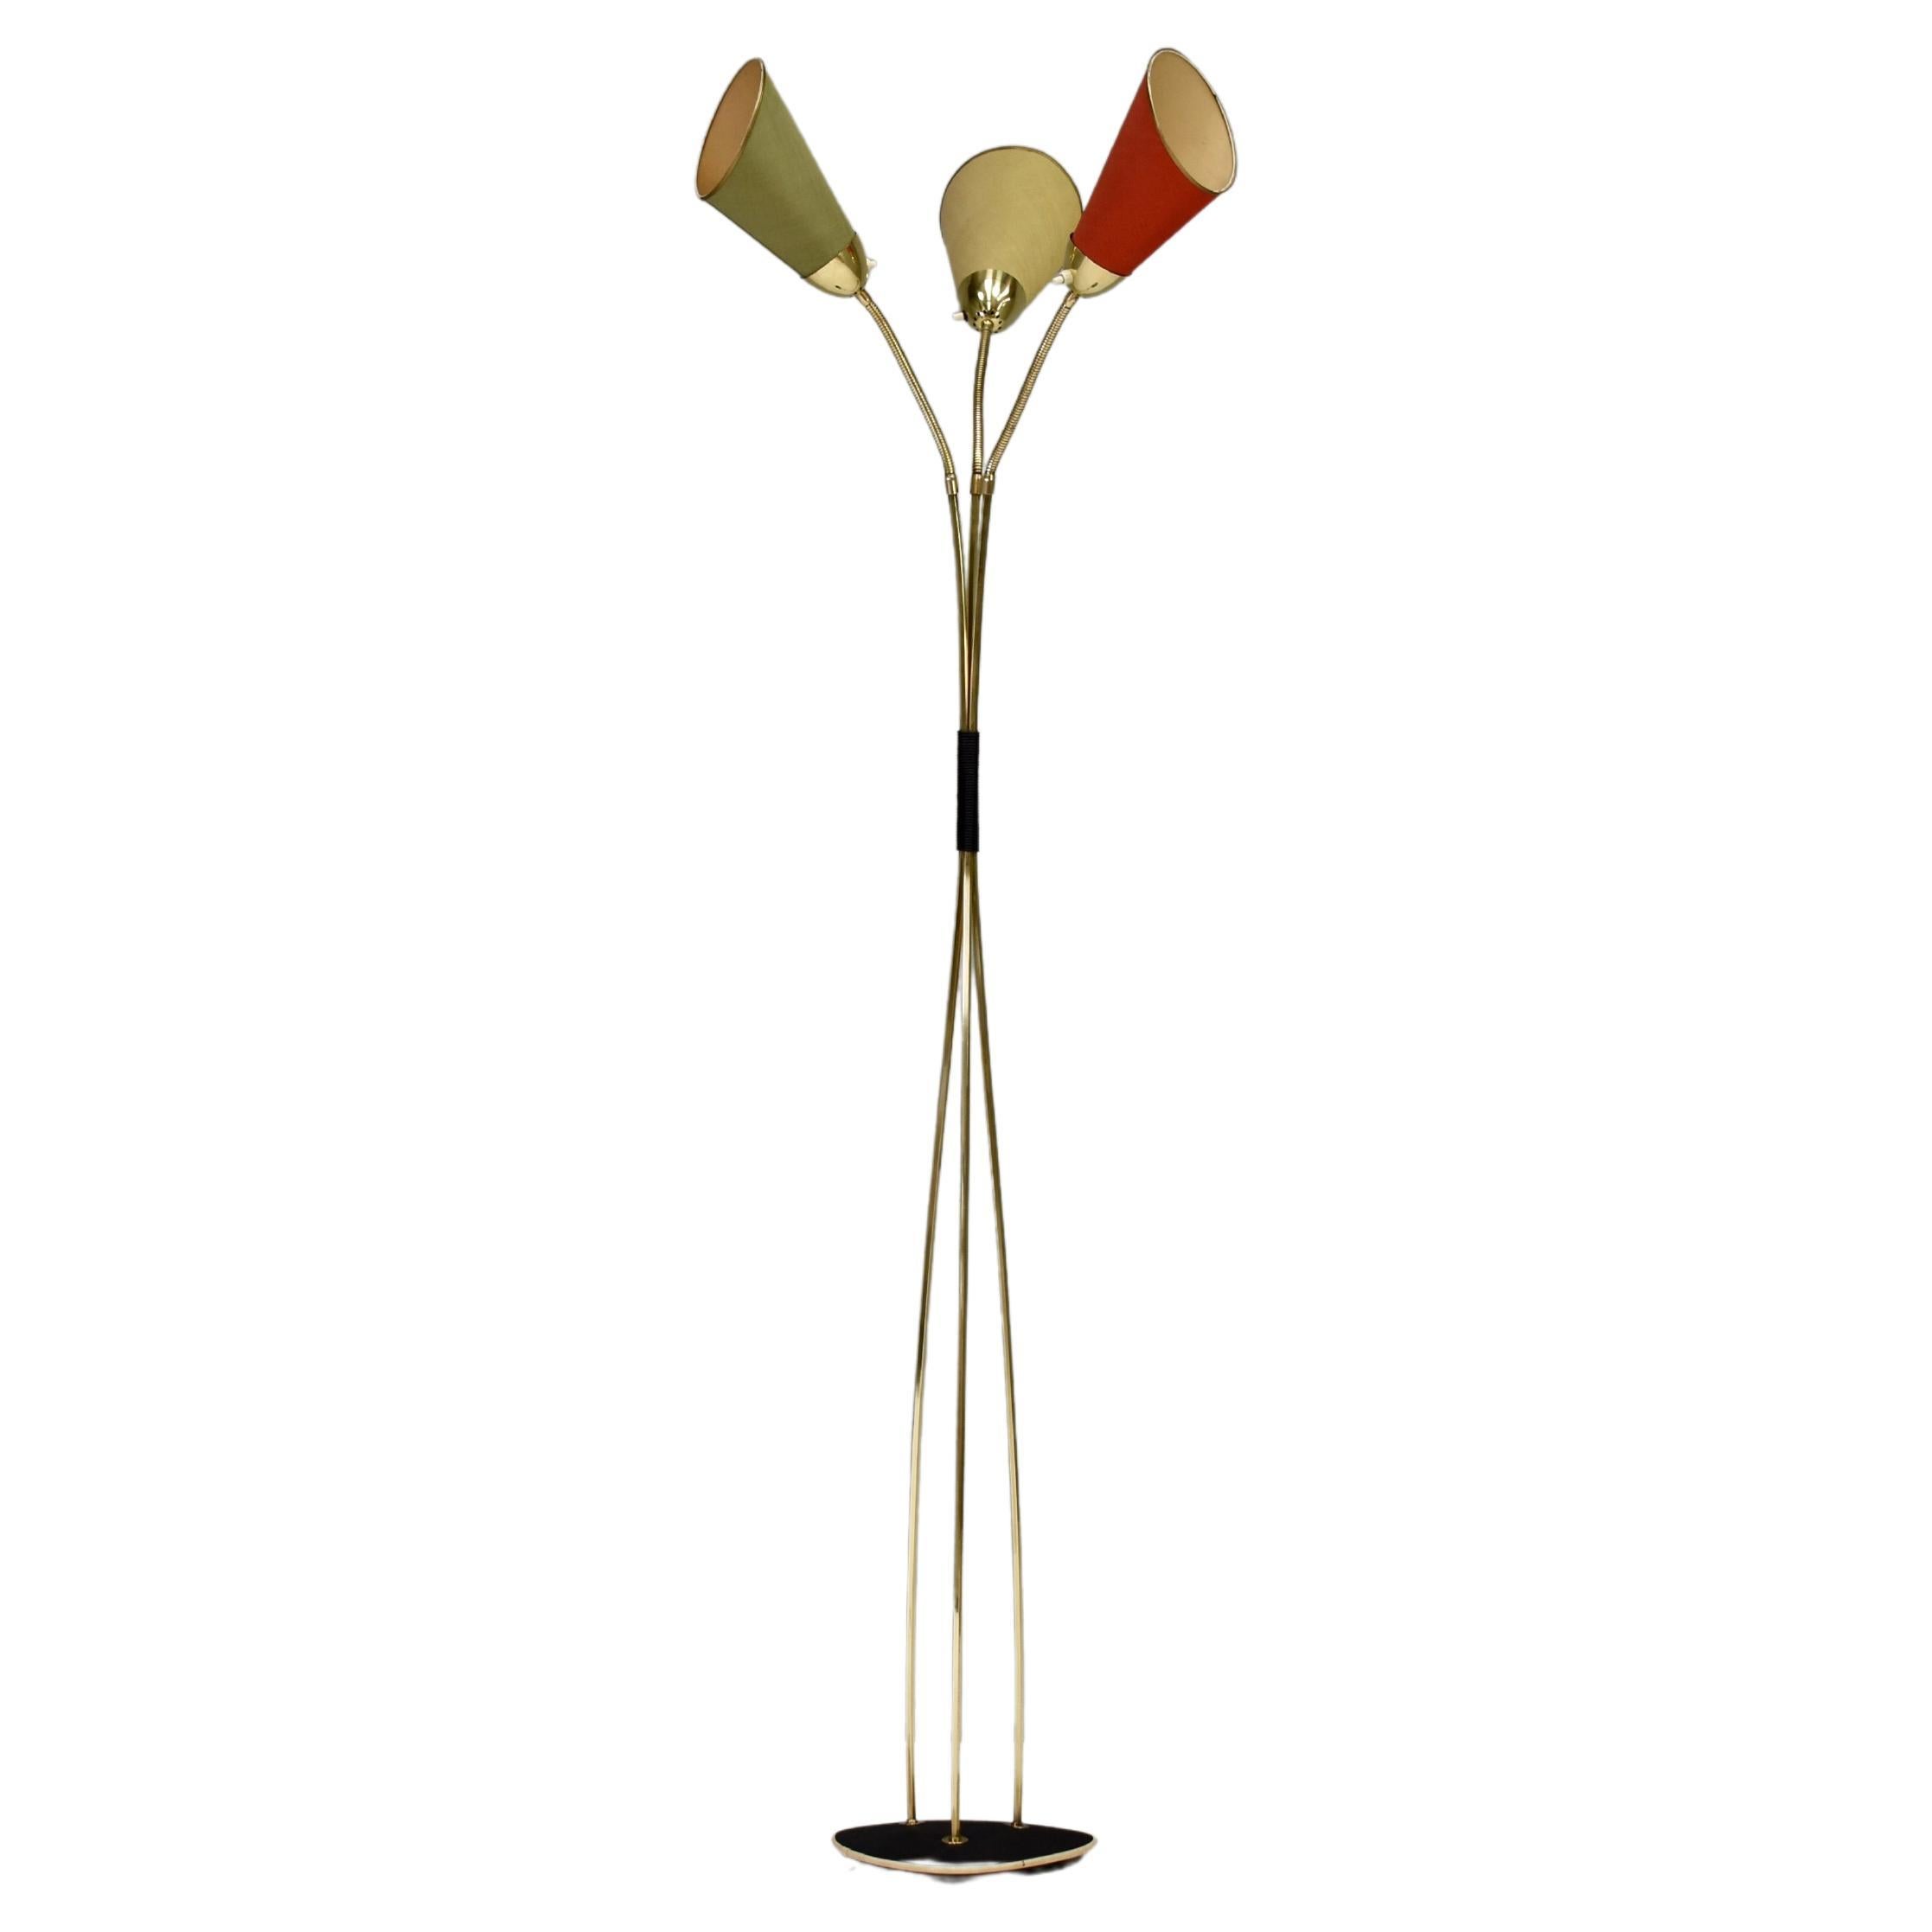 Elegant 1950’s Italian floor lamp in brass and three fabric shades in pastel colours. The shades can be bent in all ways. The heritage can't be determined exactly but the manor of craftsmanship, design and quality show high-end and sophisticated